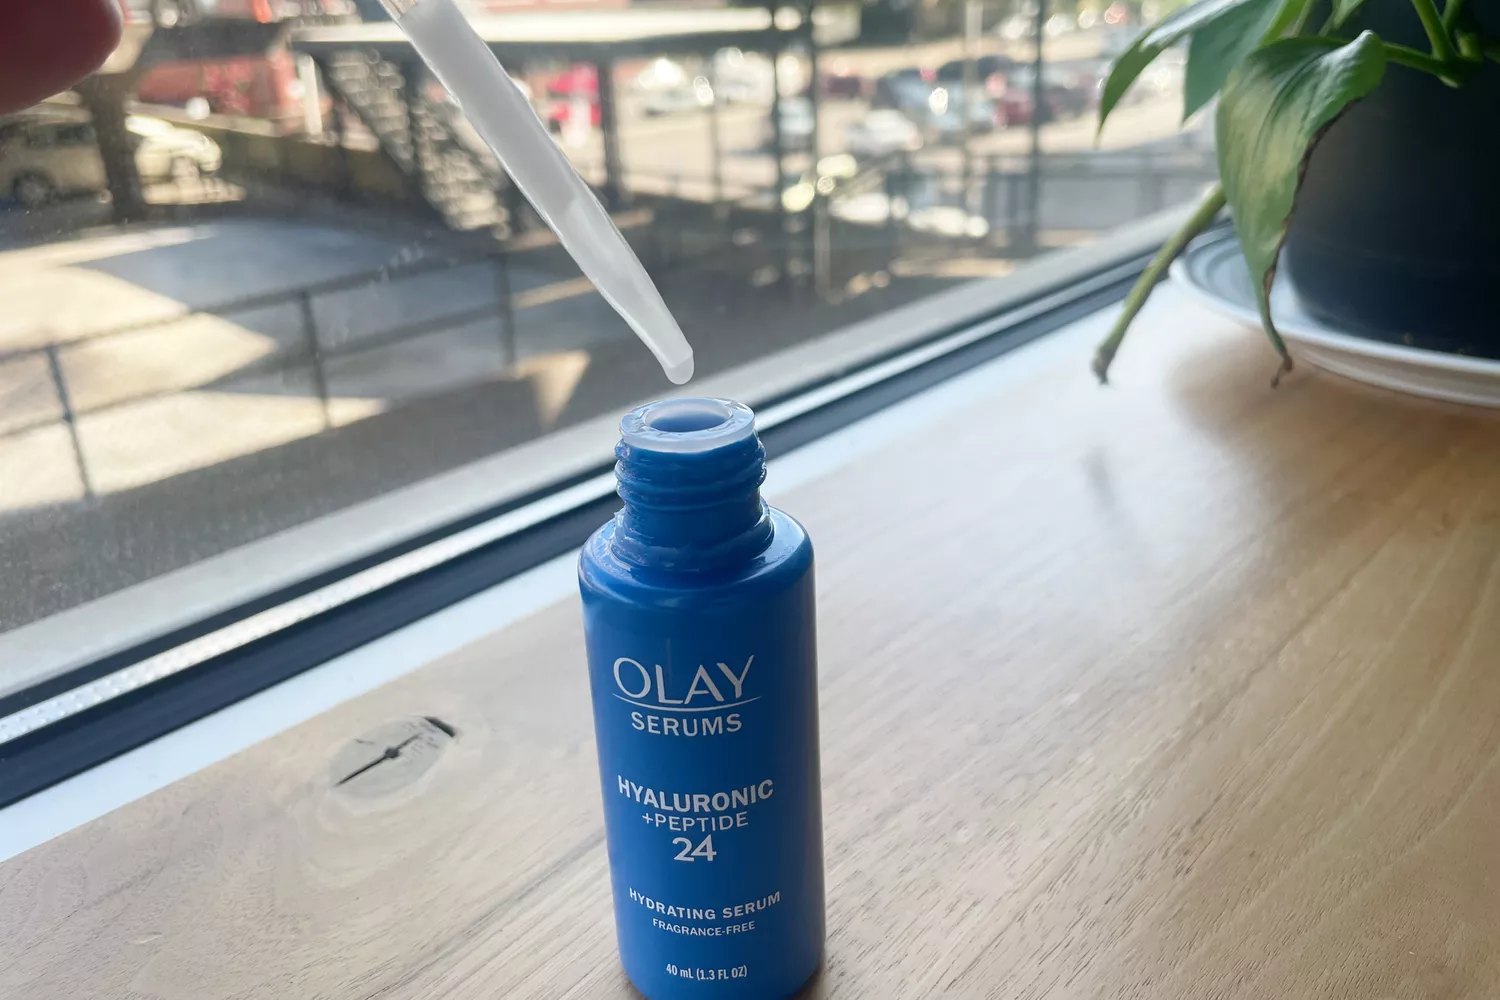 A person holds the dropper on the OLAY Hyaluronic + Peptide 24 Serum